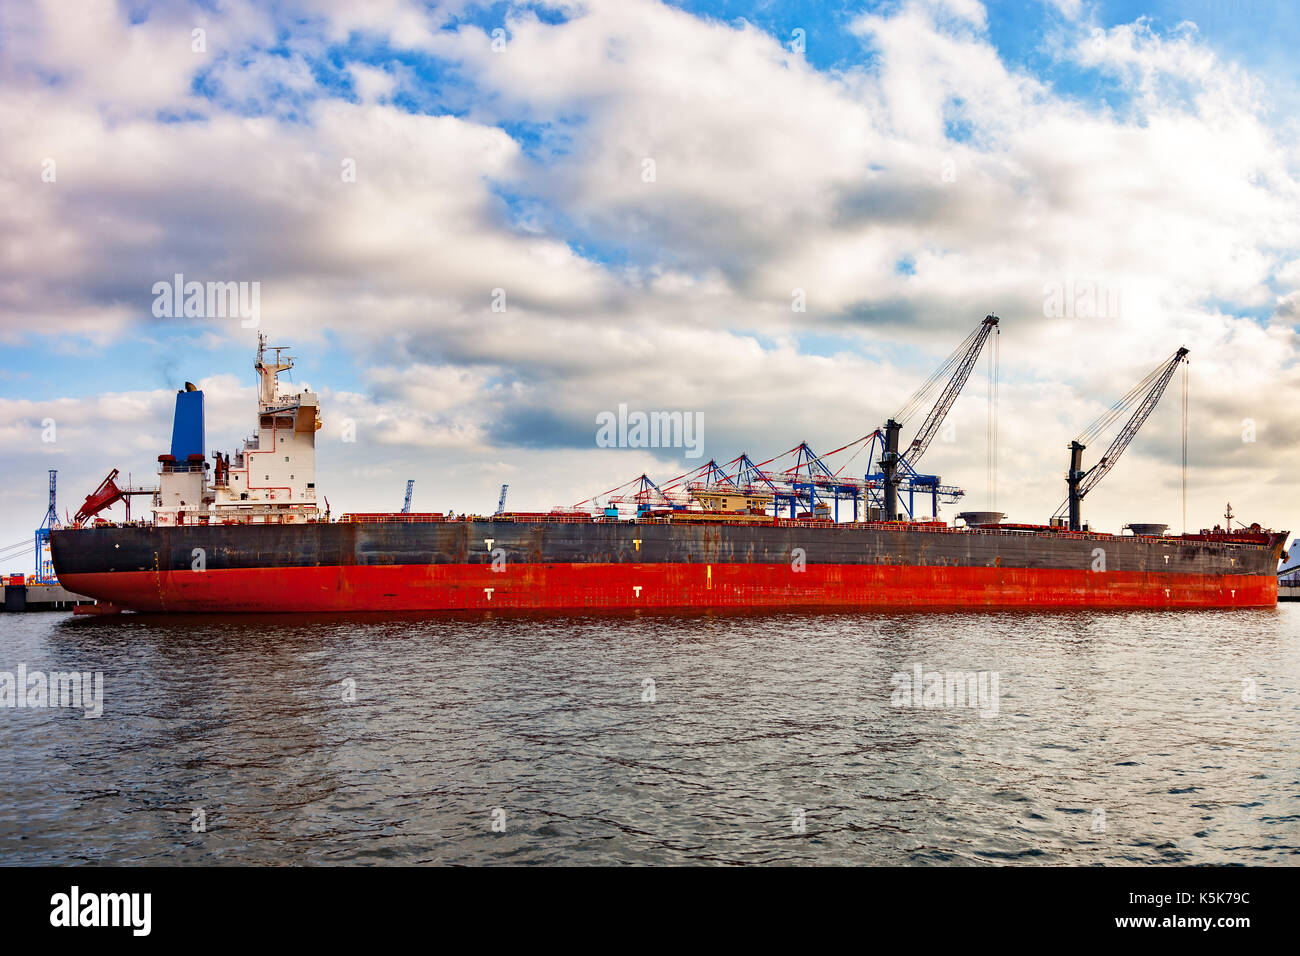 Cargo ship moored at the quayside in the port of Gdansk, Poland. Stock Photo